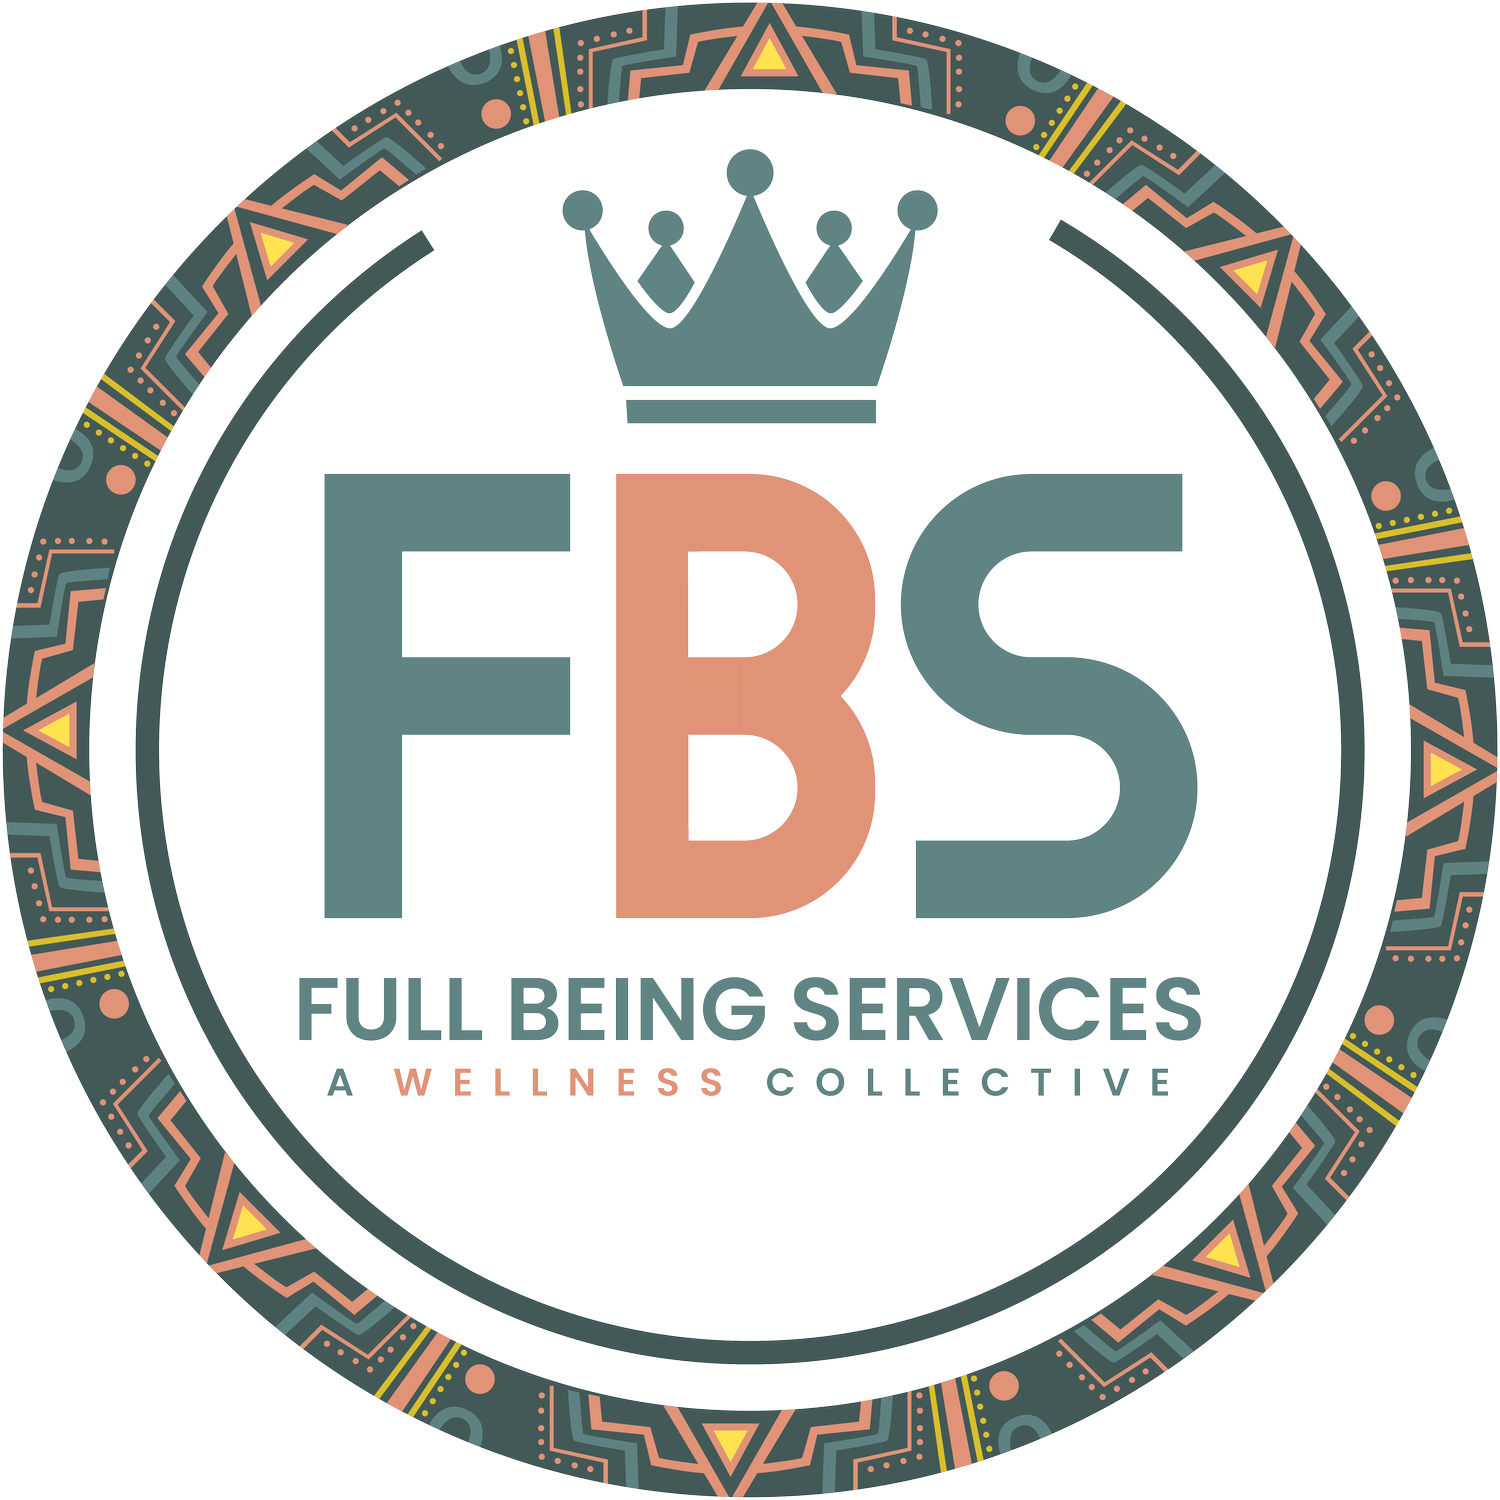 Full Being Services